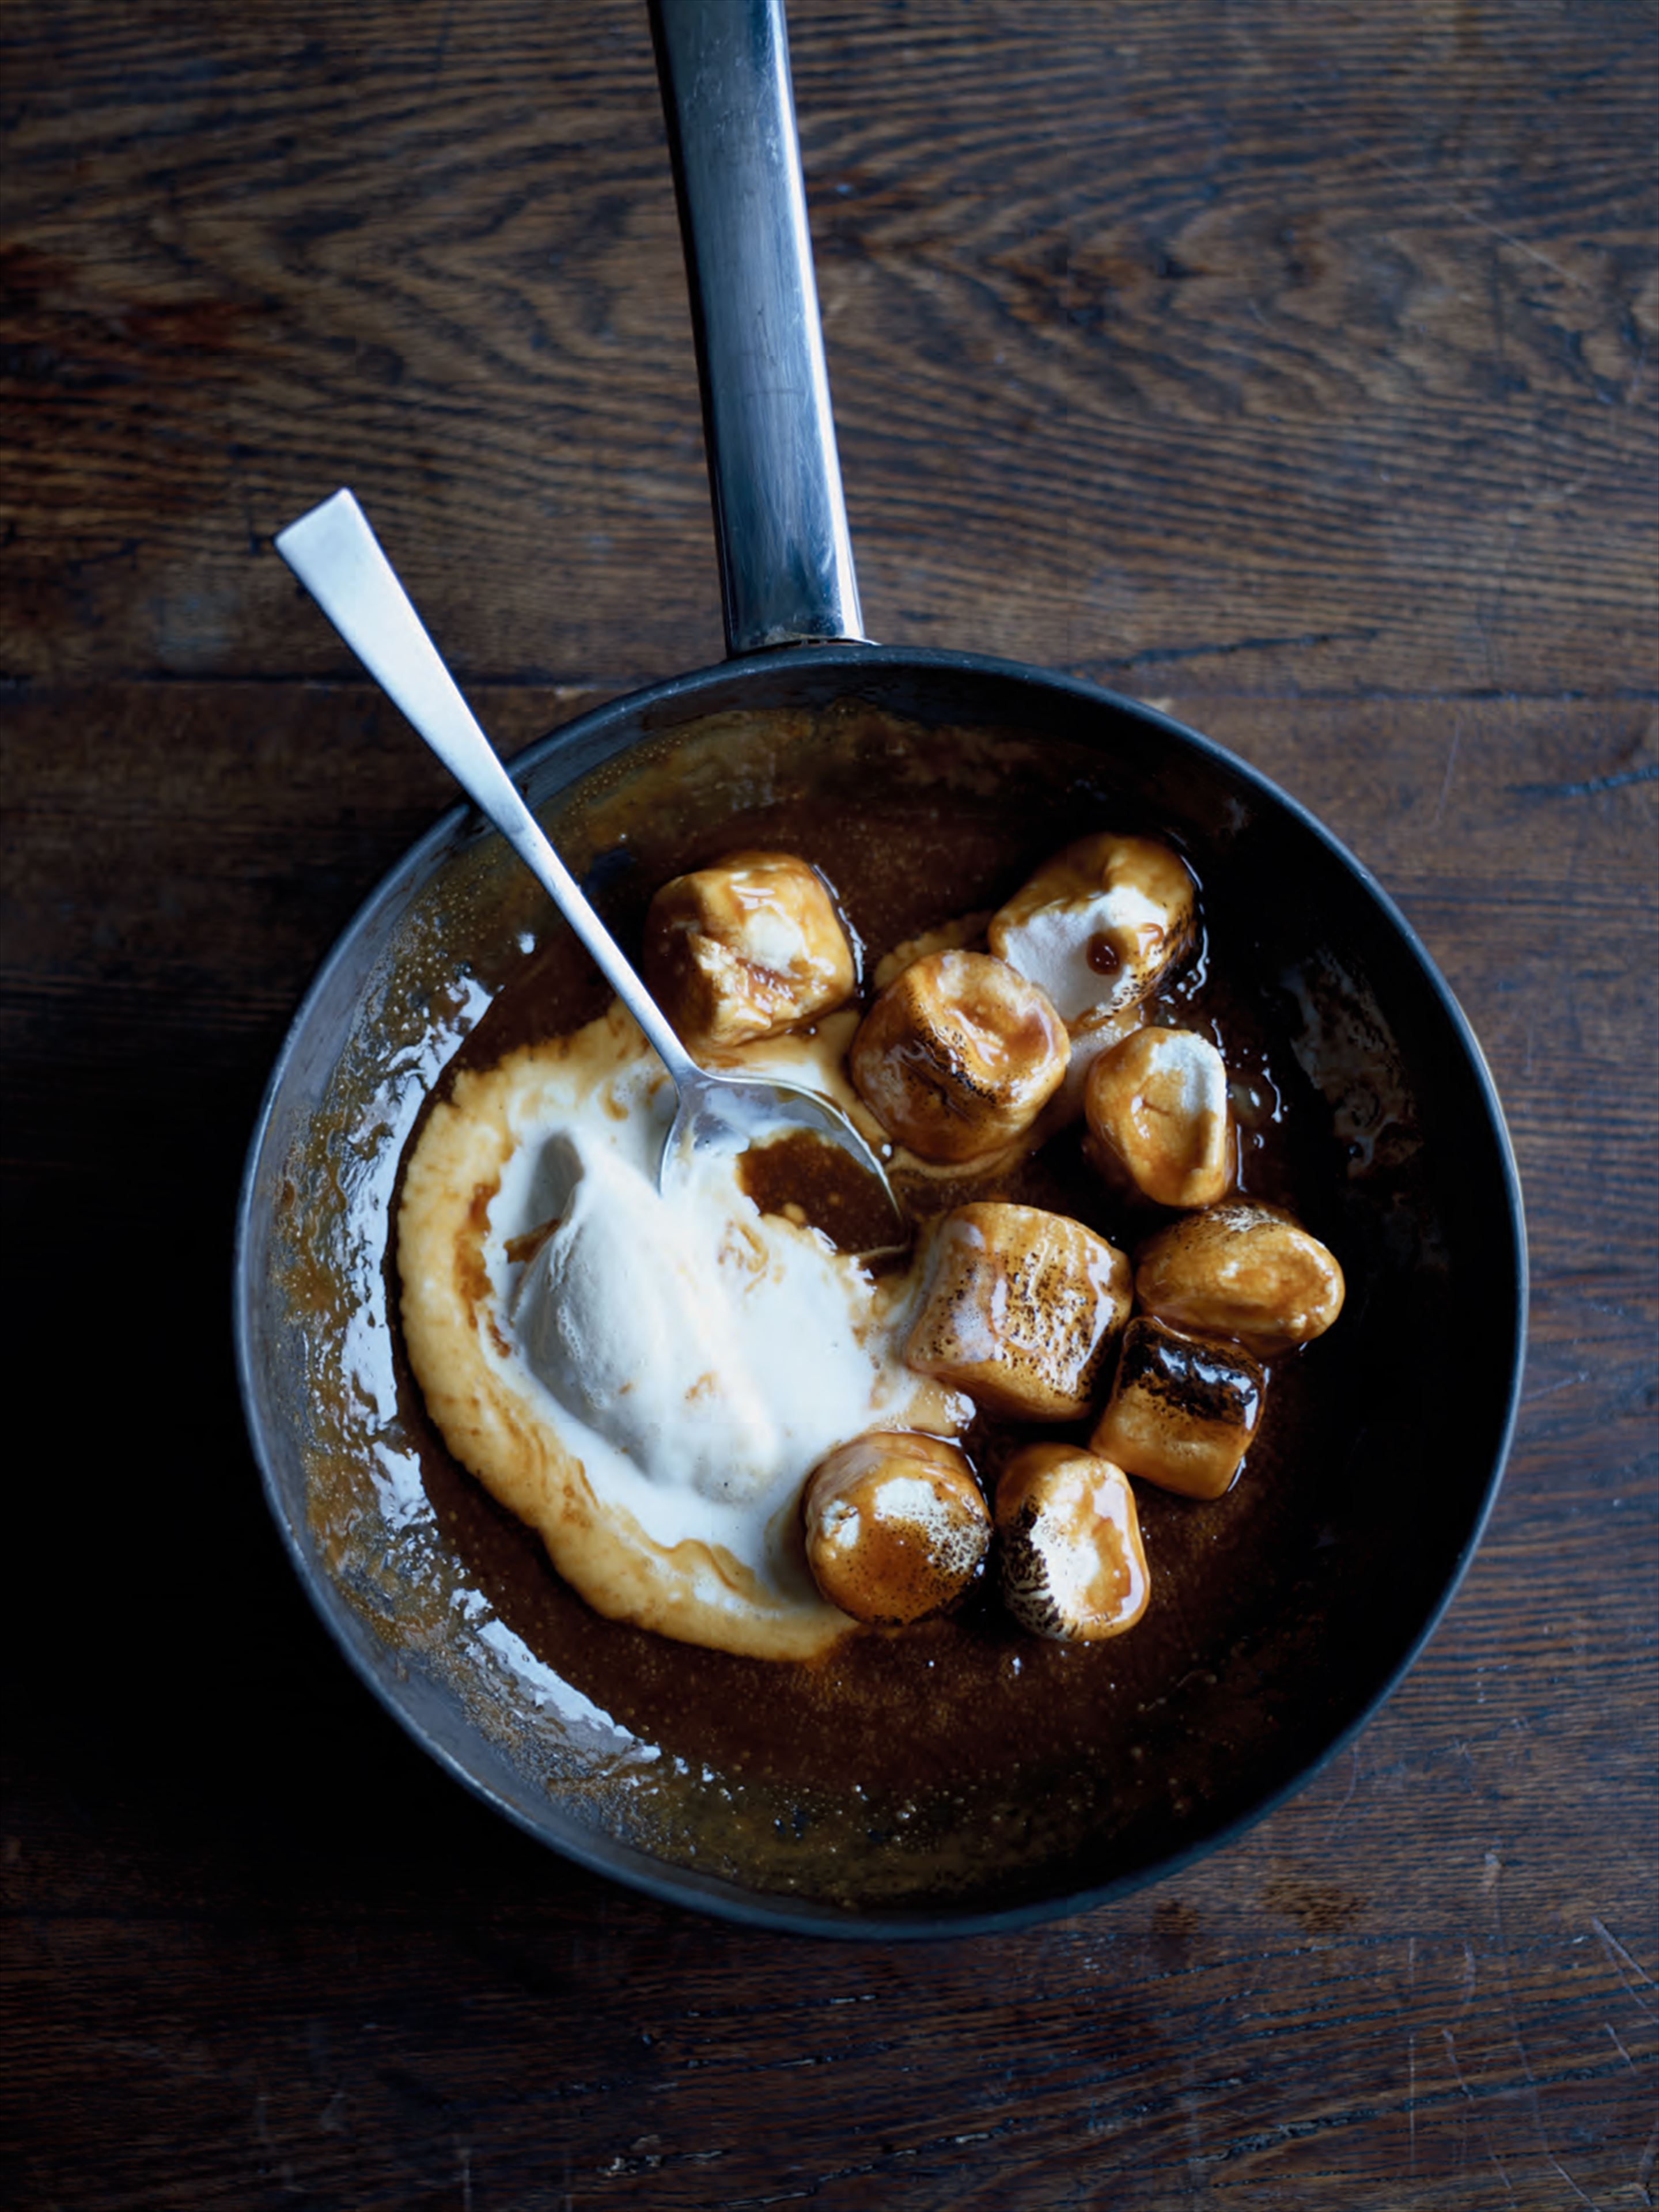 Ice cream with whisky toffee sauce & toasted marshmallows